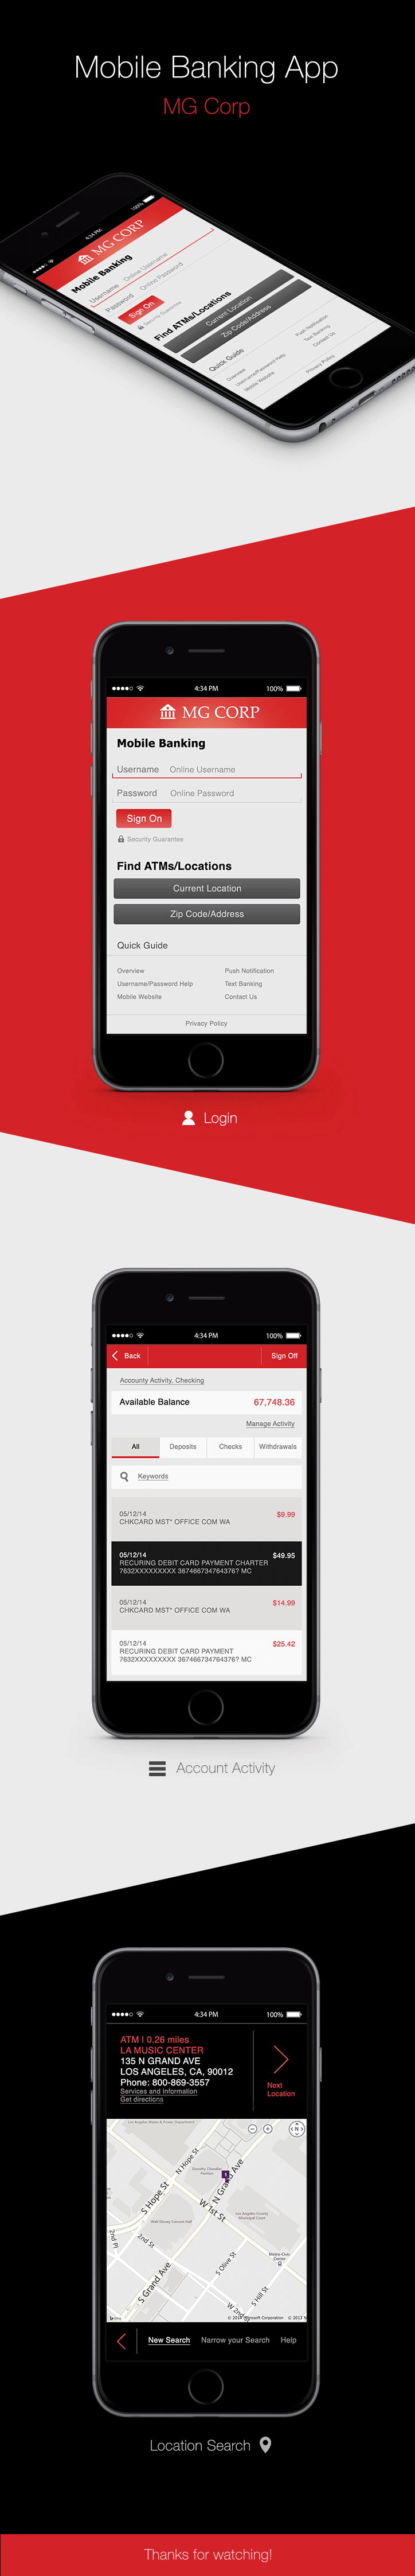 Mobile Banking App Design by AlfredoCreates